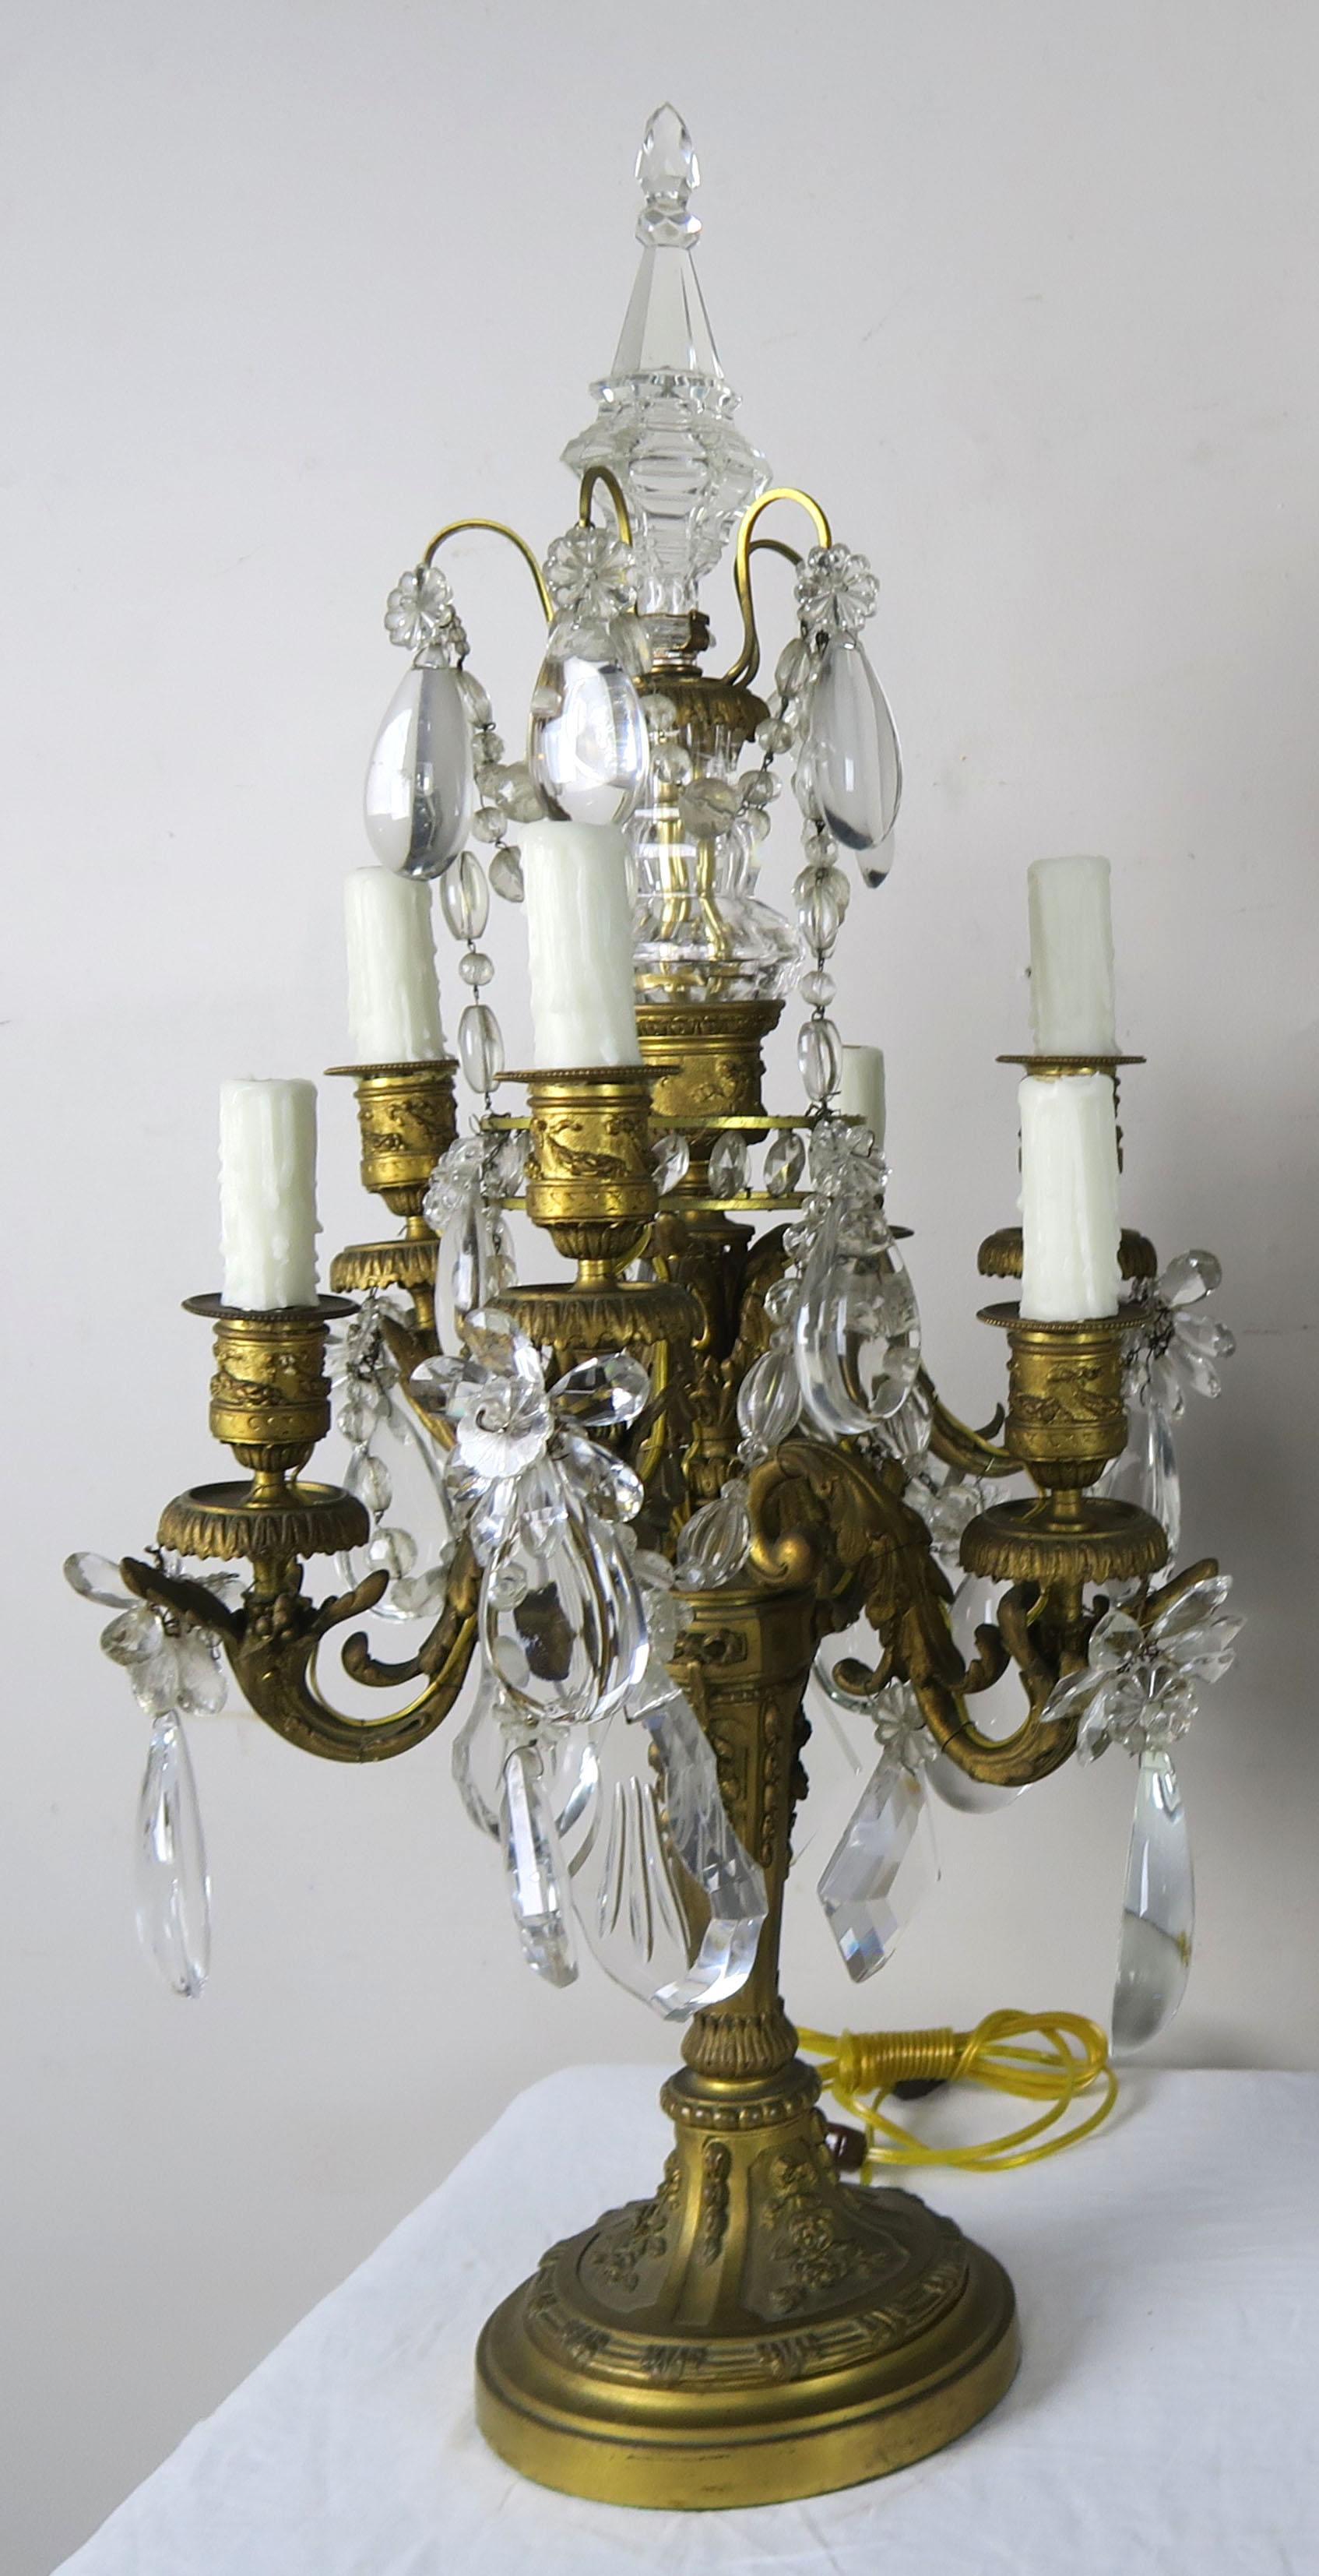 A pair of 19th century French Louis XIV style six light bronze girandles that have been newly electrified with drip wax candle covers. The girandles are adorned with heavy crystal drops, crystal flowers and garlands of crystal beads throughout.